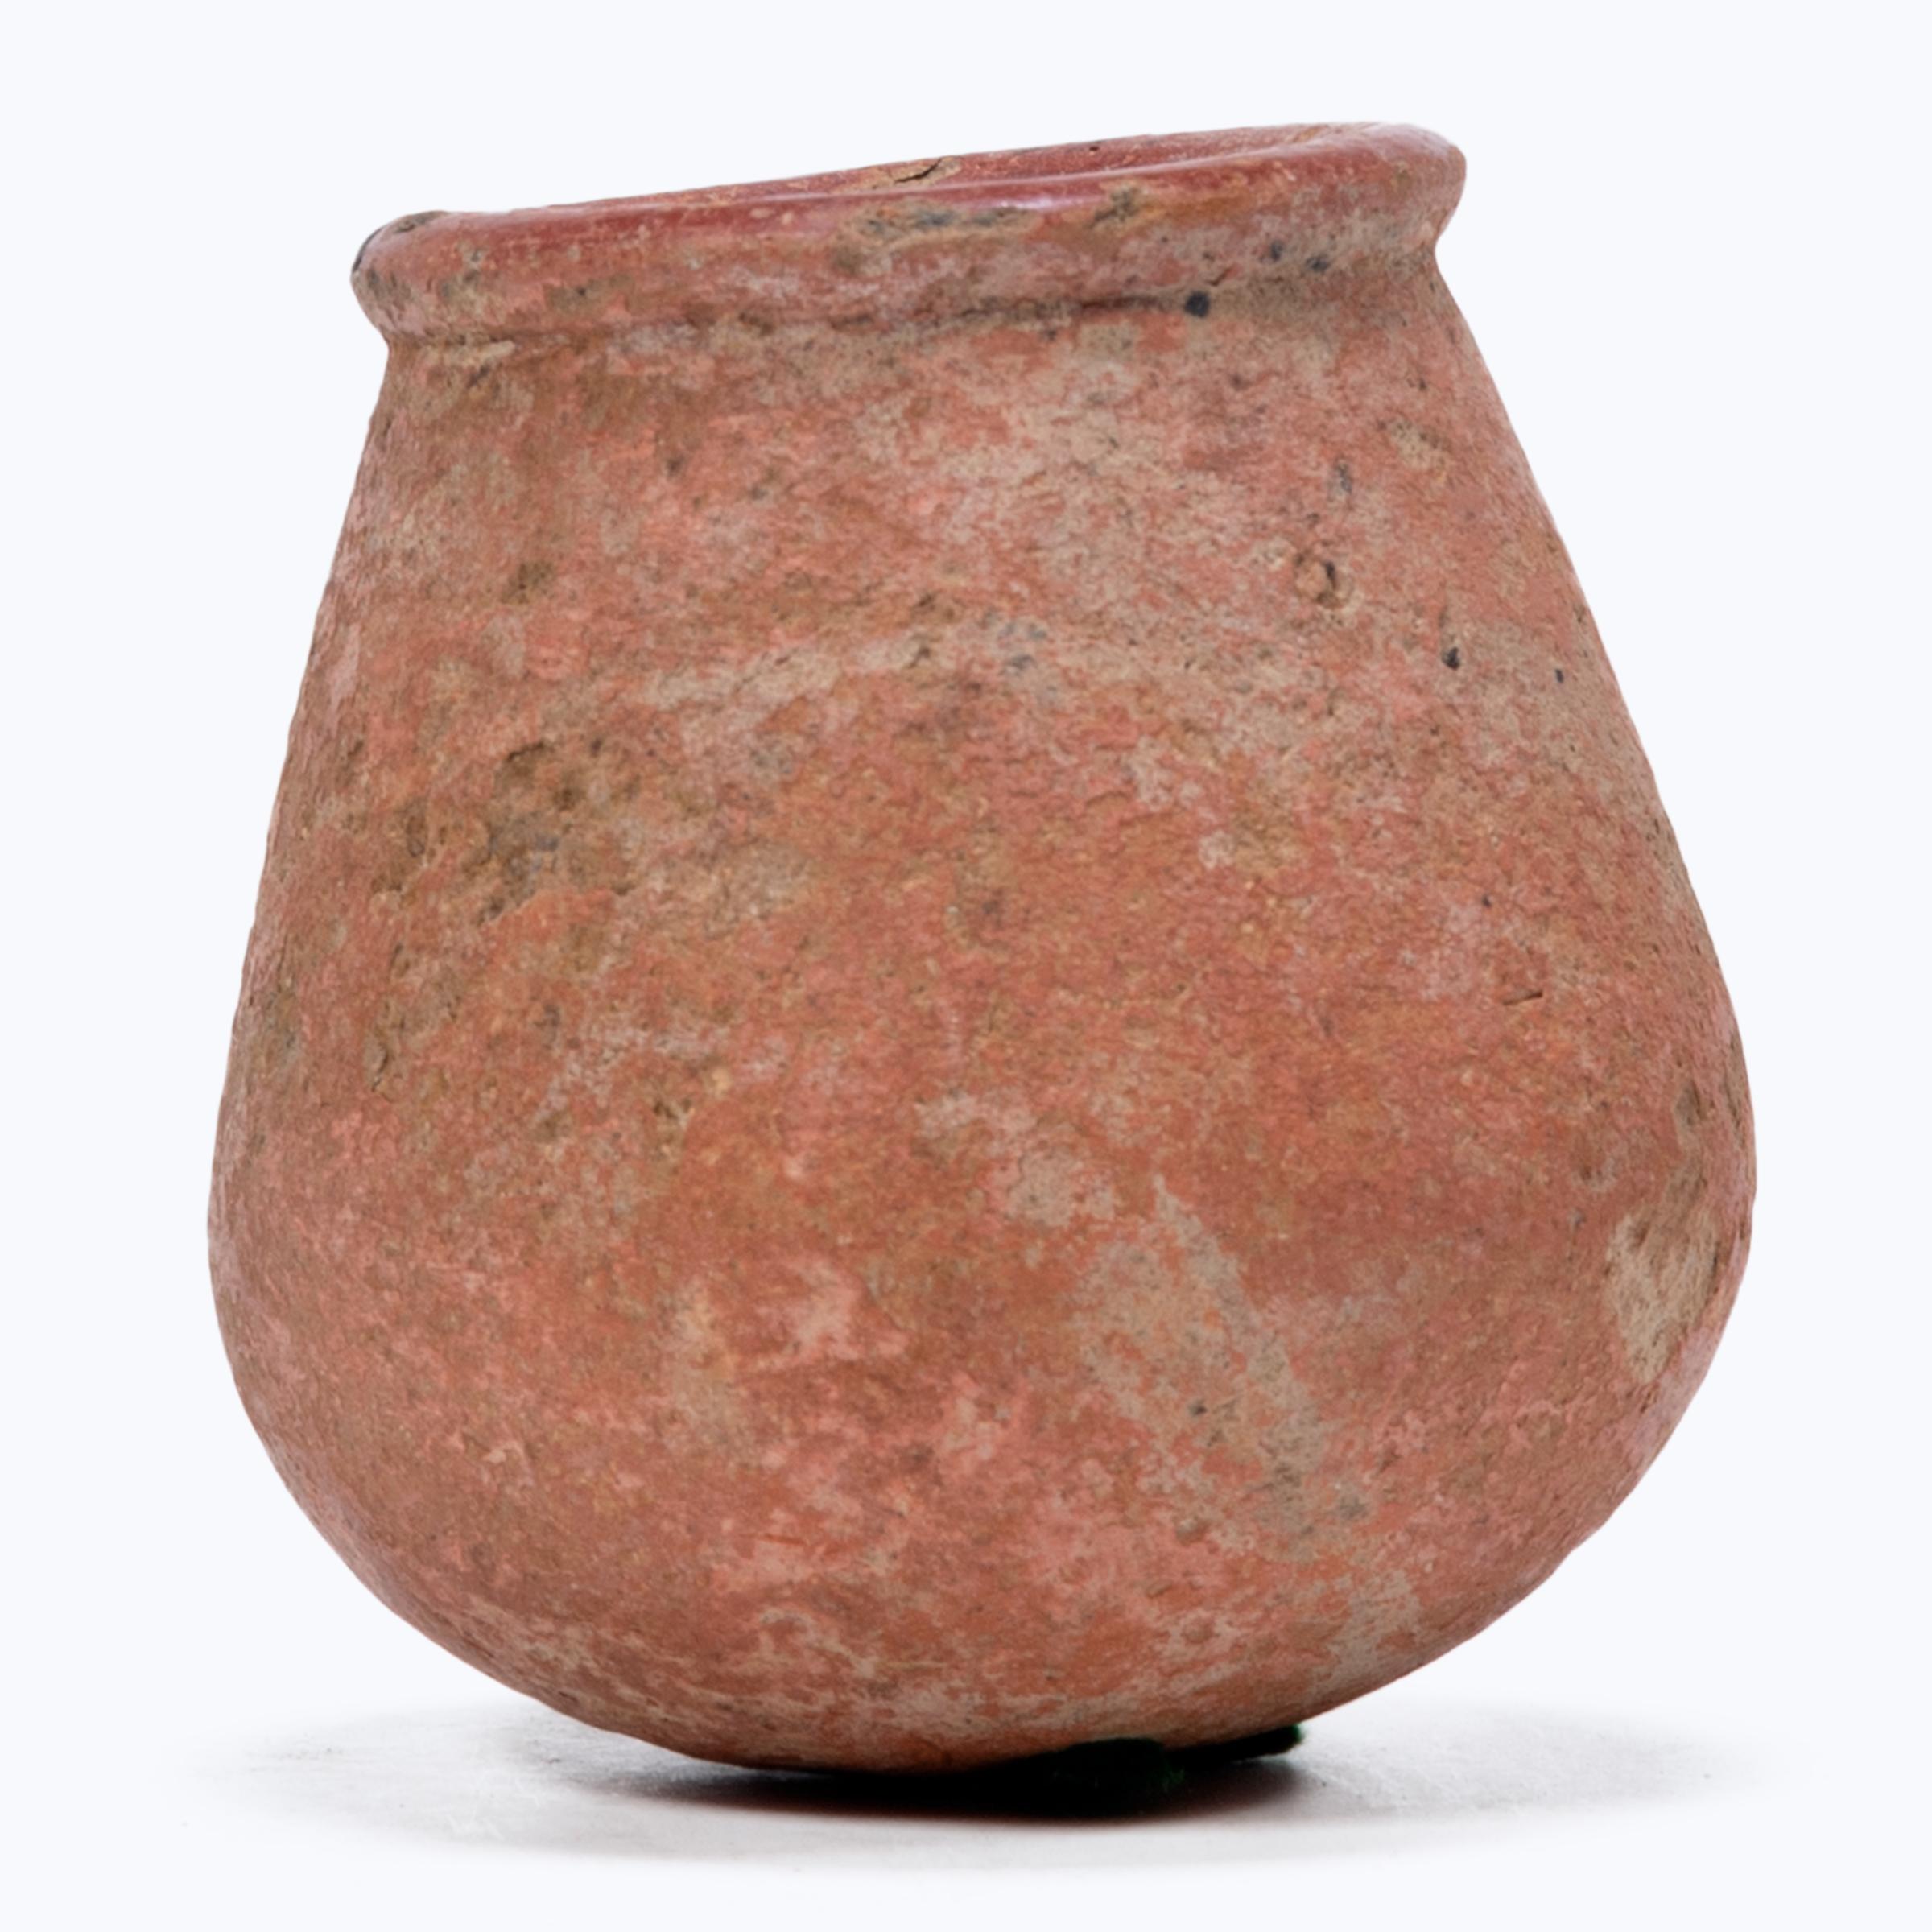 This petite hand-formed vessel bears a richly textured surface of worn red clay slip and dark smoke marks. Likely intended for everyday use, the simple bottle-form vessel reflects the skill of West African artisans, beautifully sculpted with